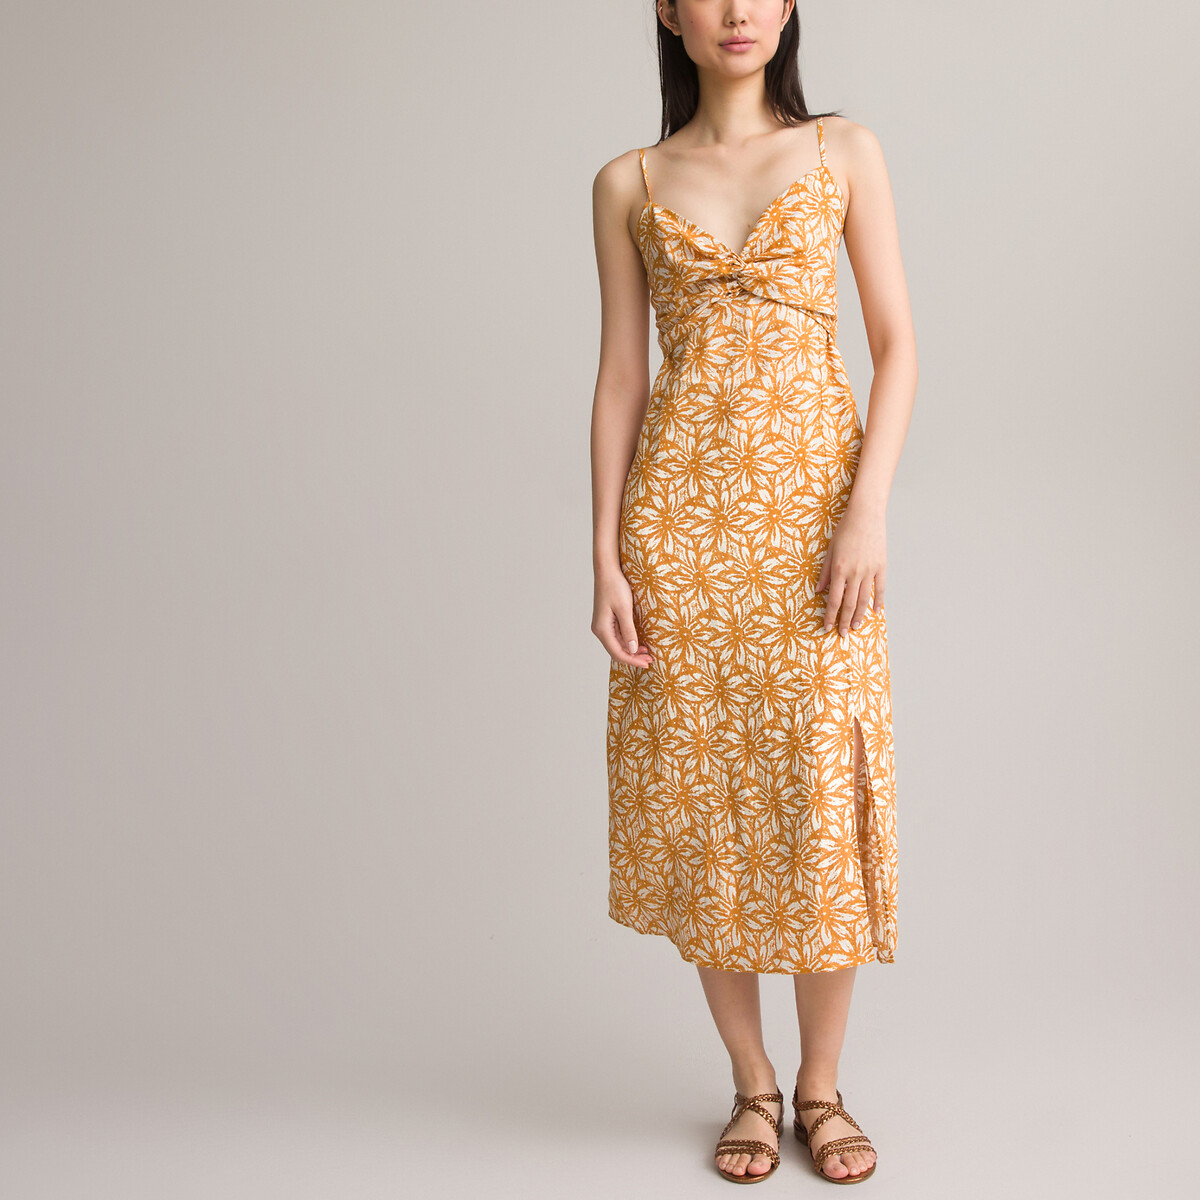 Guide to the perfect floral summer midi dresses to elevate your style this season. From elegant garden parties to casual sunny days, find your ideal match for comfort, style, and versatility. Summer Dress | Sundress | Cute Dress | Beach Dress | Sun Dress | Midi Dress | Flower Dress | Spring Fling Dress | Floral Summer Midi Dresses | Floral Summer Midi Dress | Floral Midi Dress | Floral Midi Dresses | Floral Midi Dress Outfit | Floral Midi Dresses Casual | Floral Midi Dress Outfit Summer